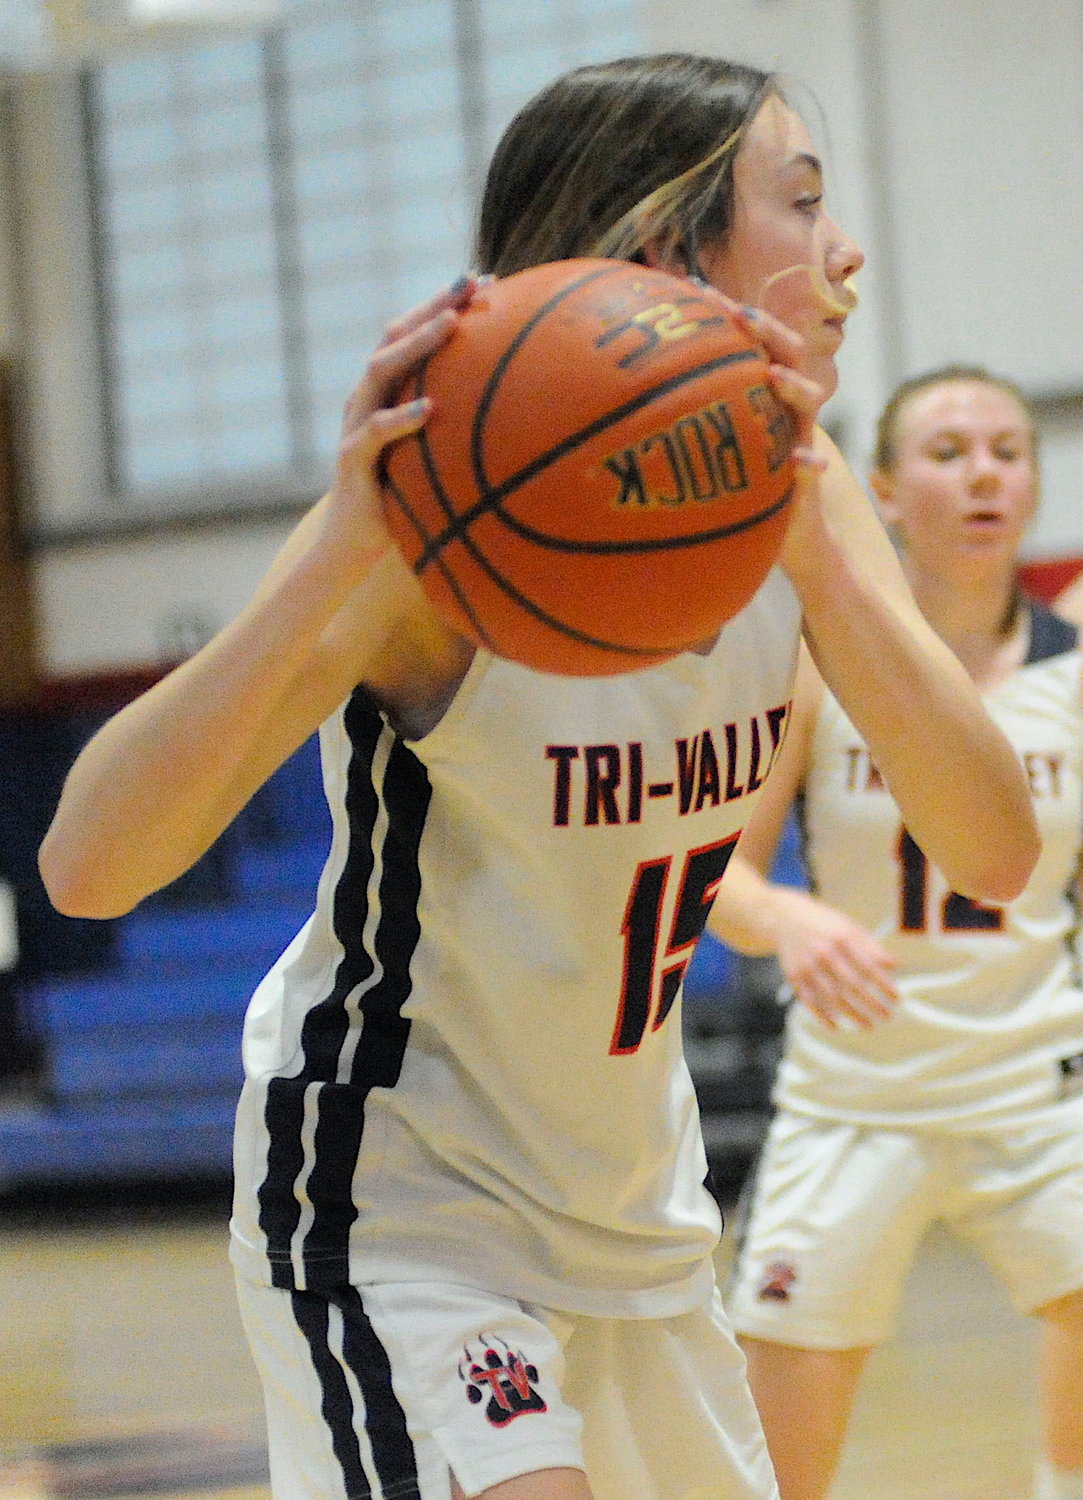 Looking forward. Tri-Valley’s Brynn Poley was 1-for-2 at the free-throw line, besting her team’s overall average of 27 percent during the game...